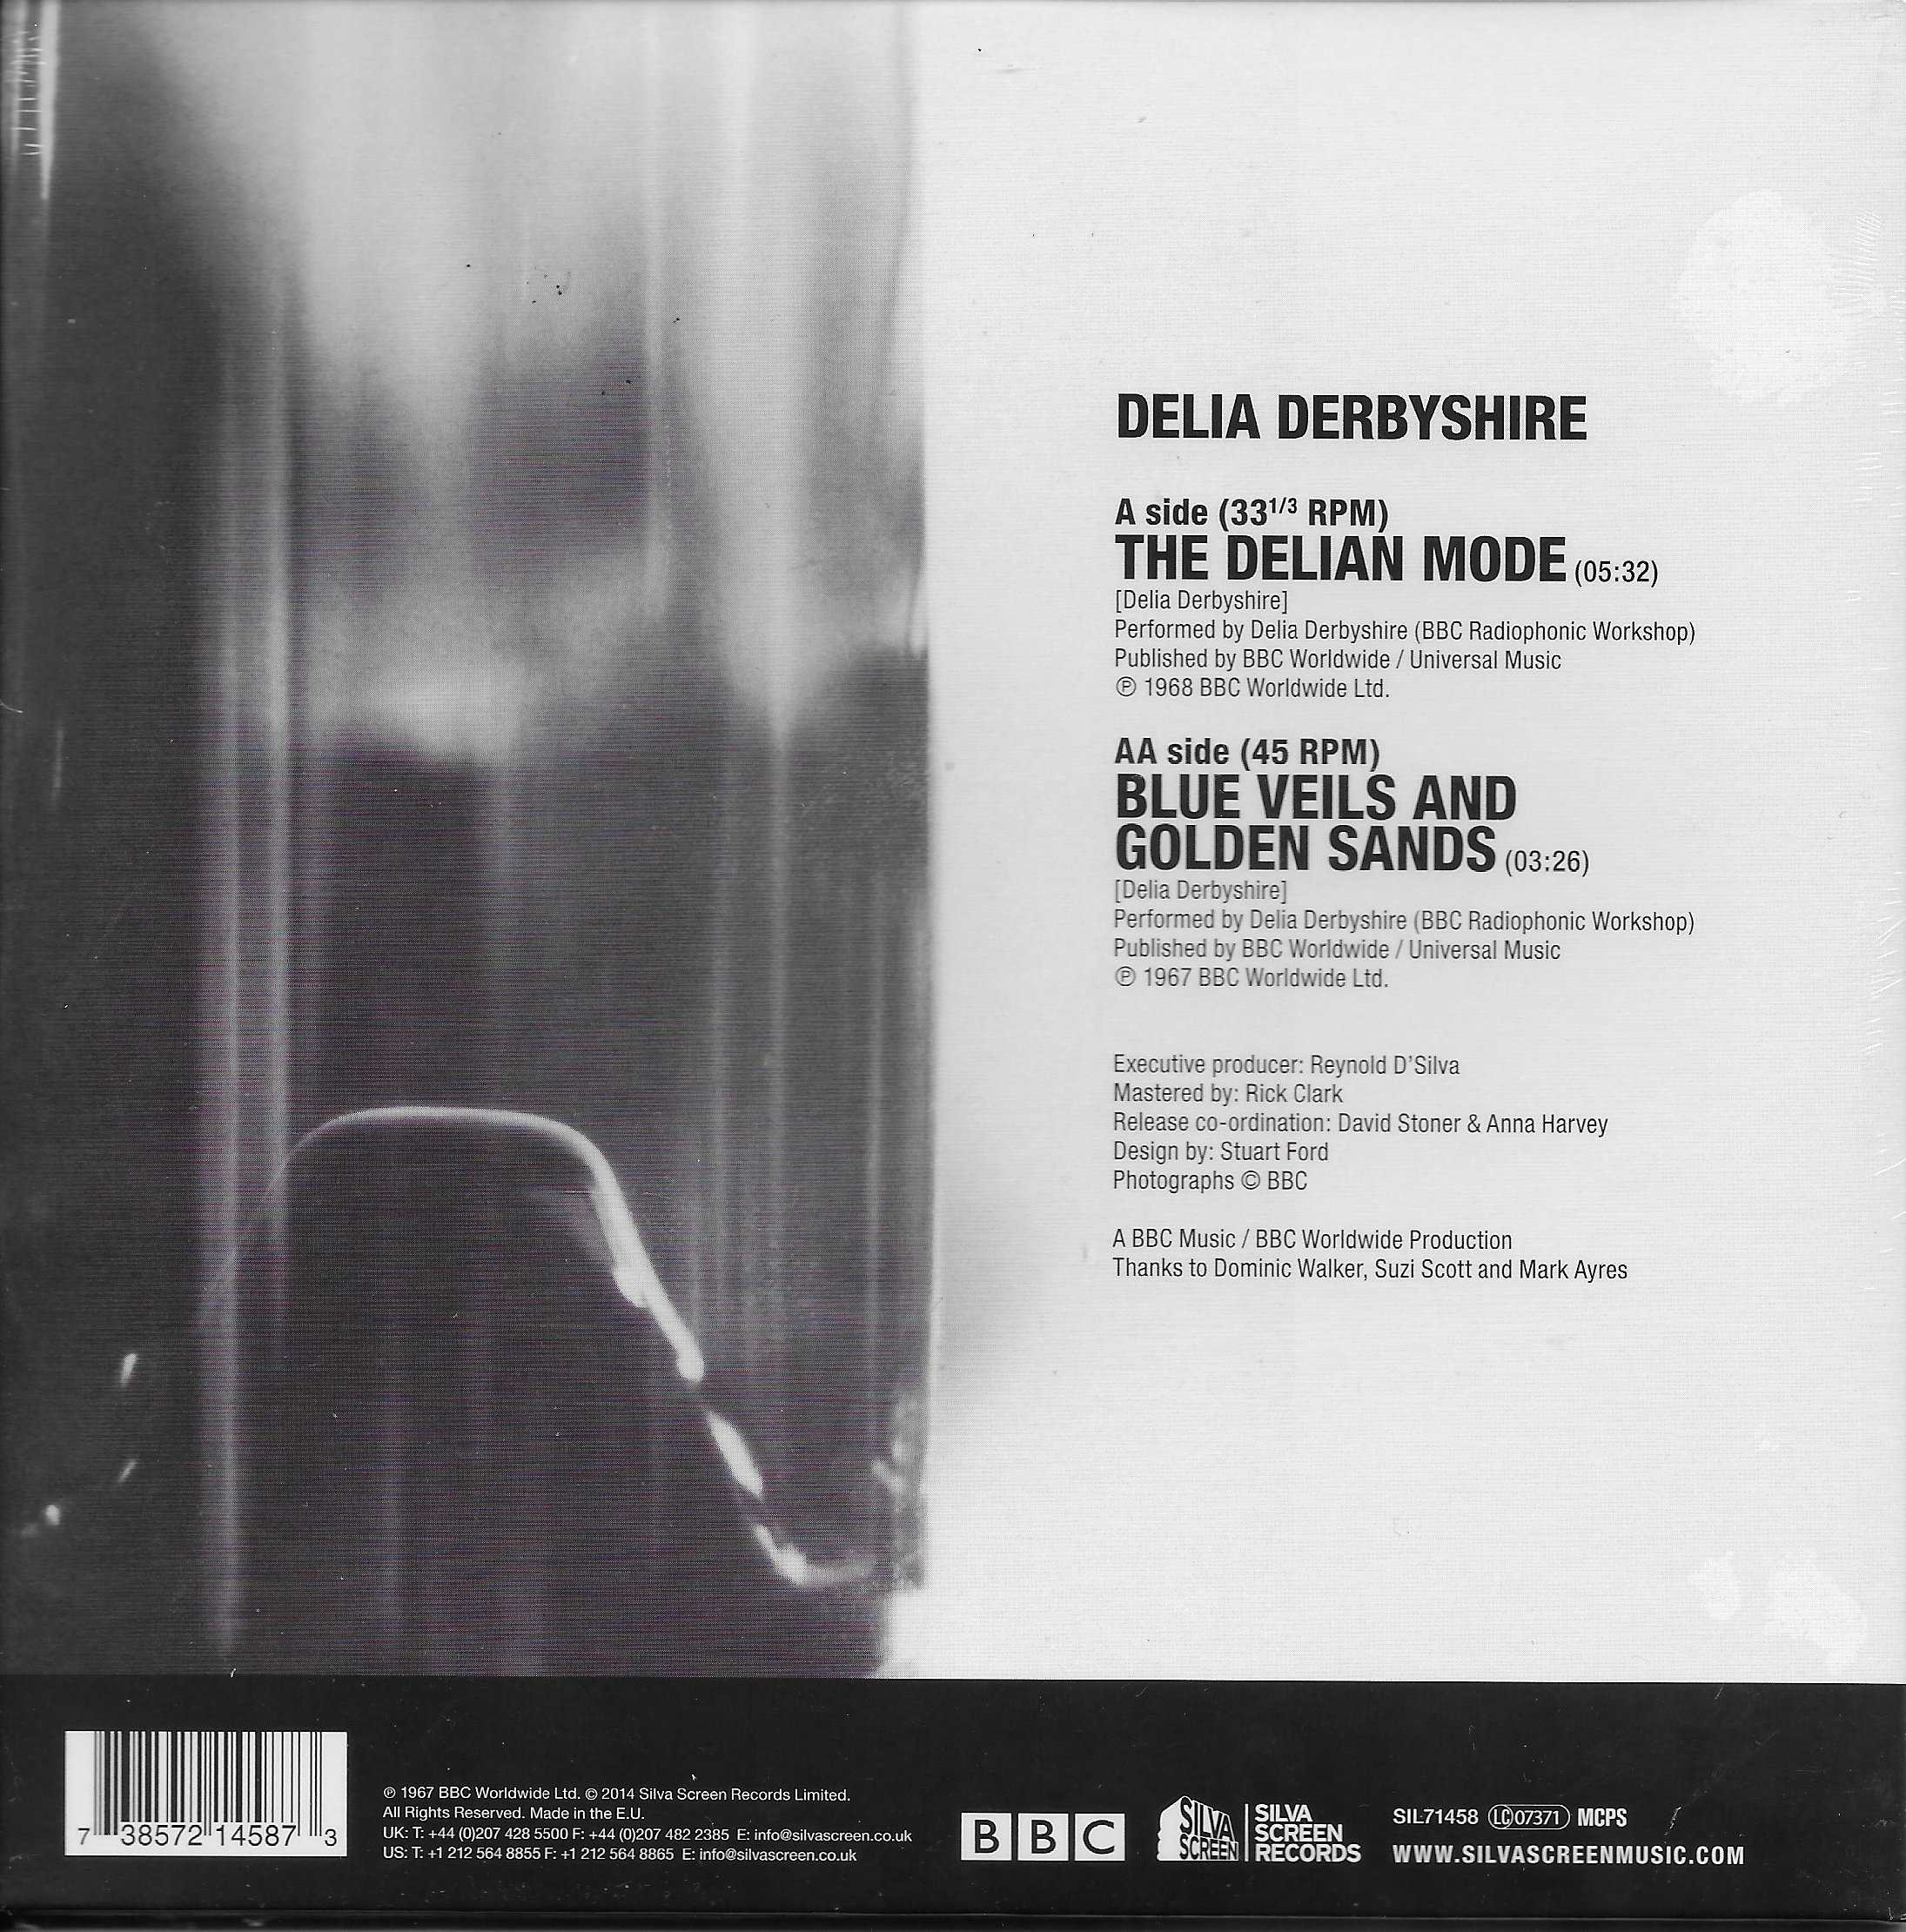 Picture of SIL7 1458 The Delian Mode by artist Delia Derbyshire from the BBC records and Tapes library